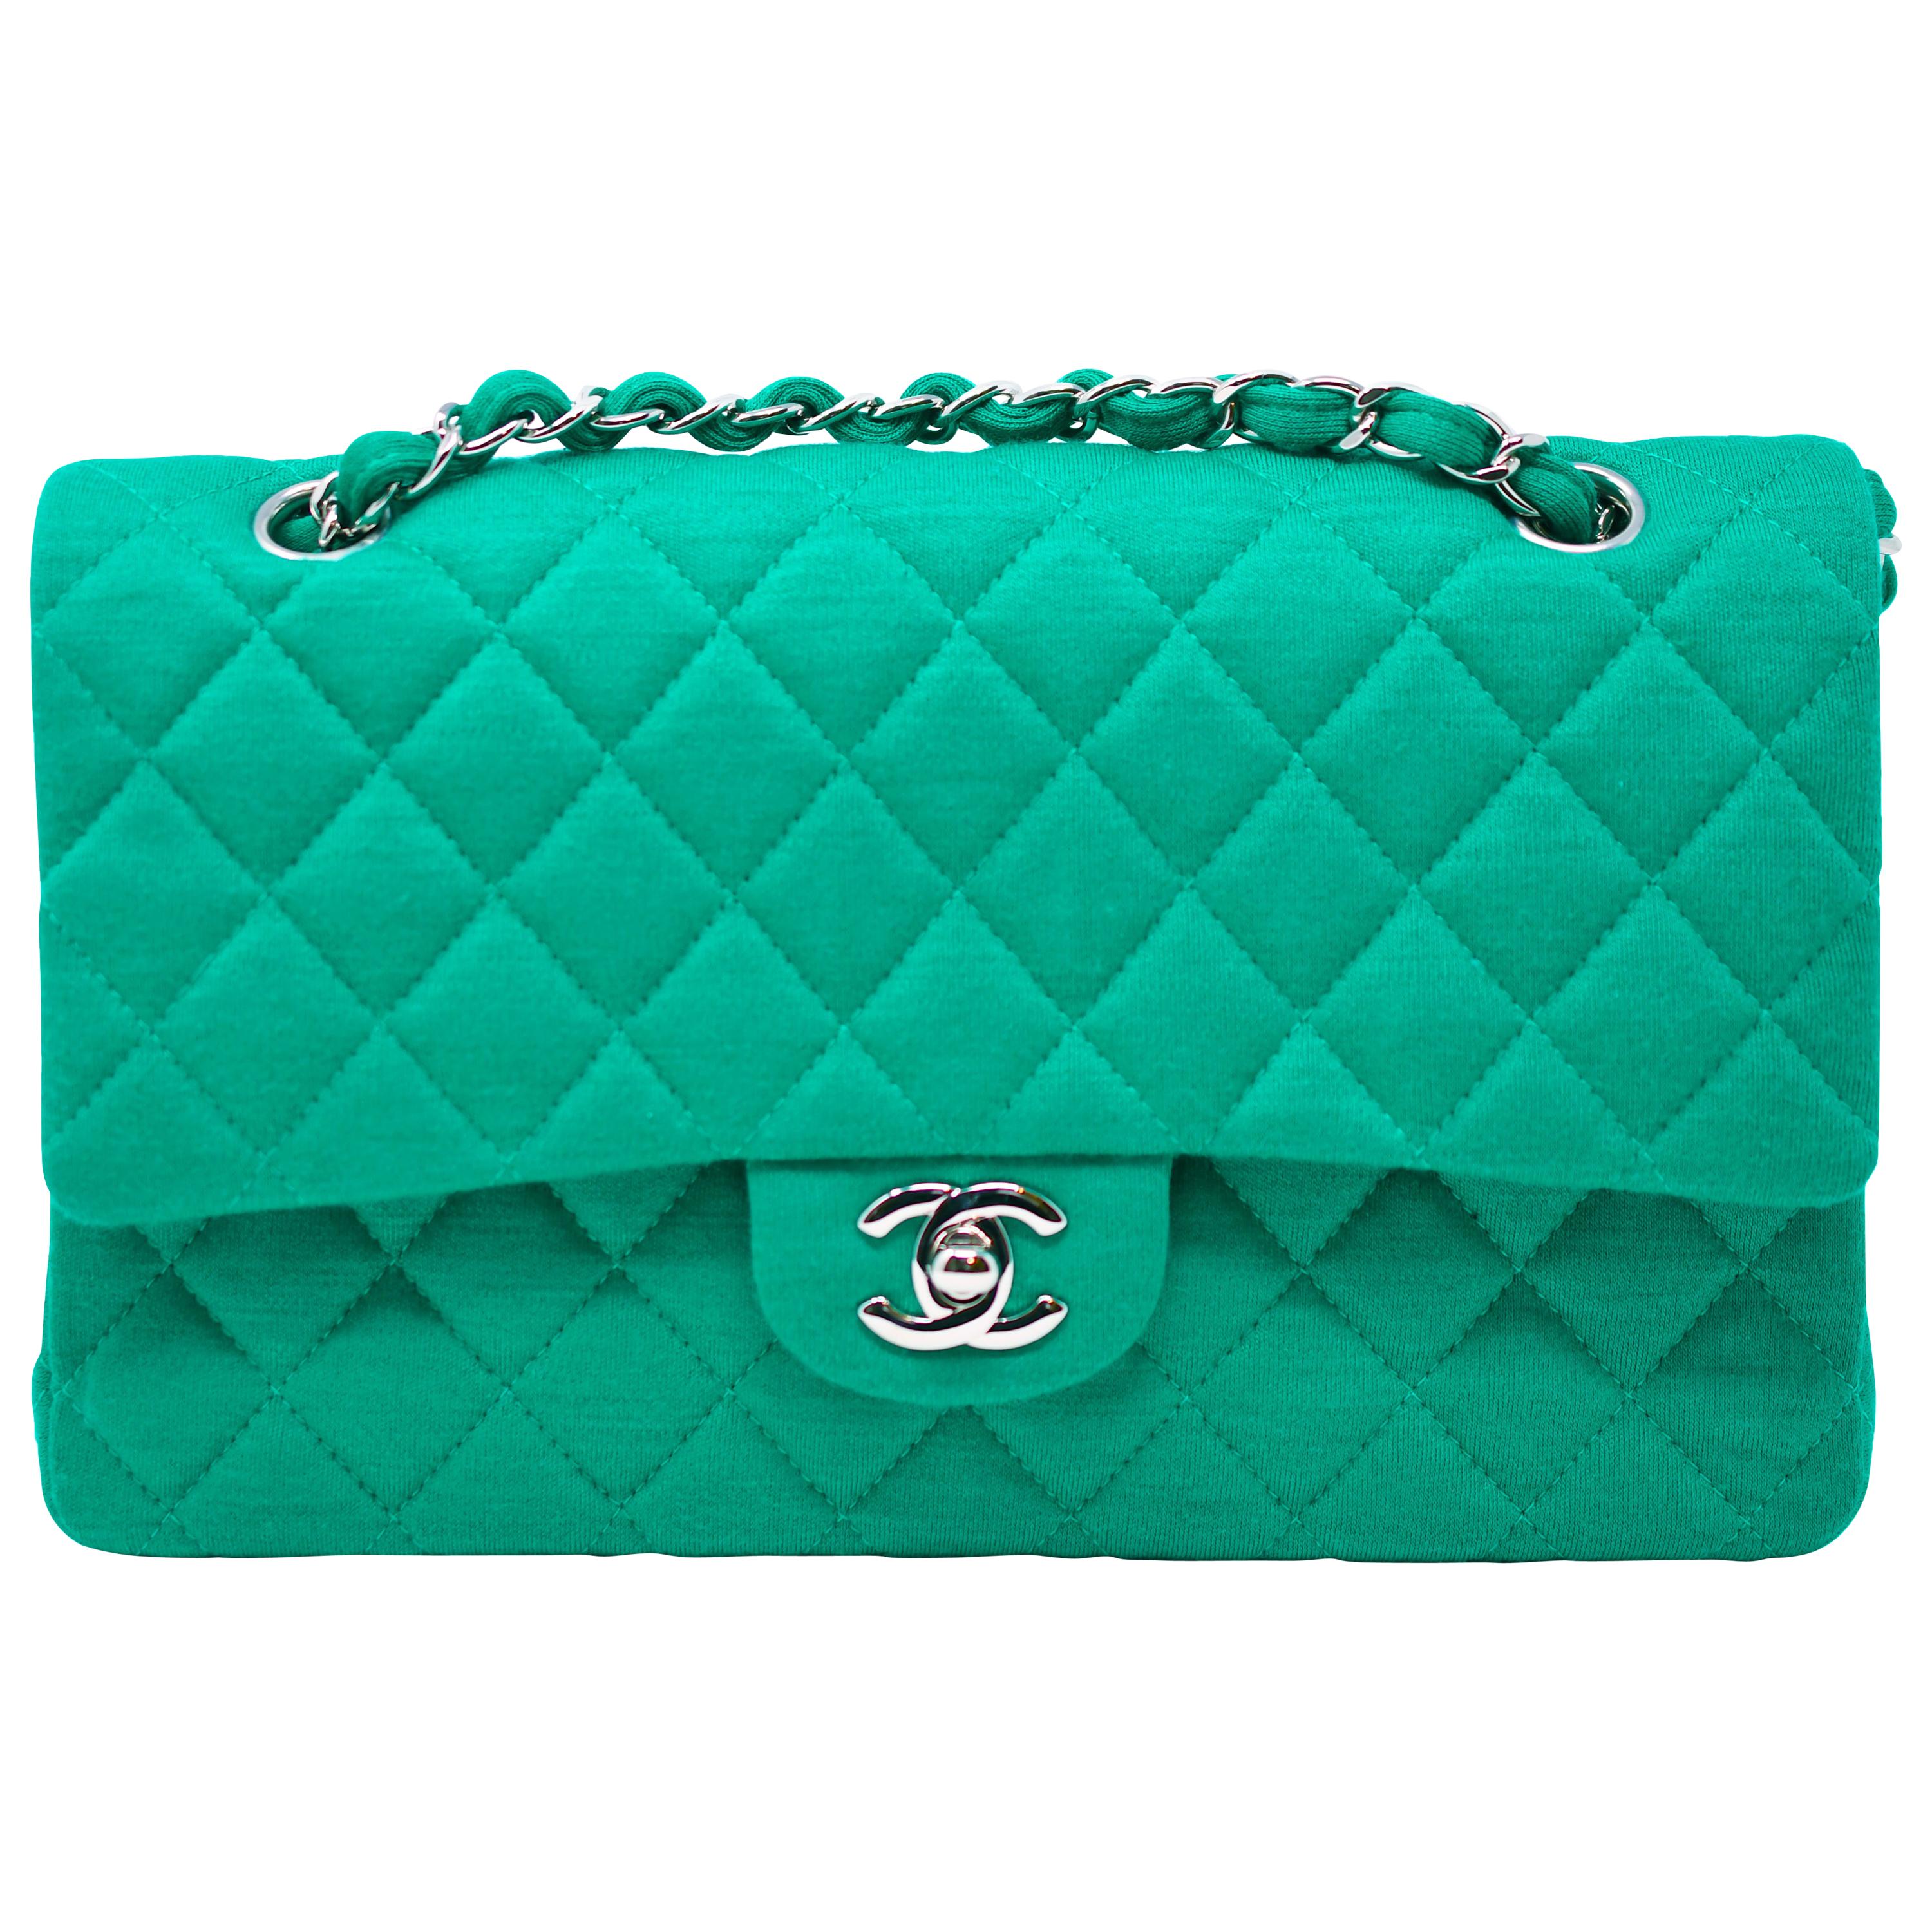 Chanel Emerald Green Jersey Knit Classic Double Flap Bag For Sale